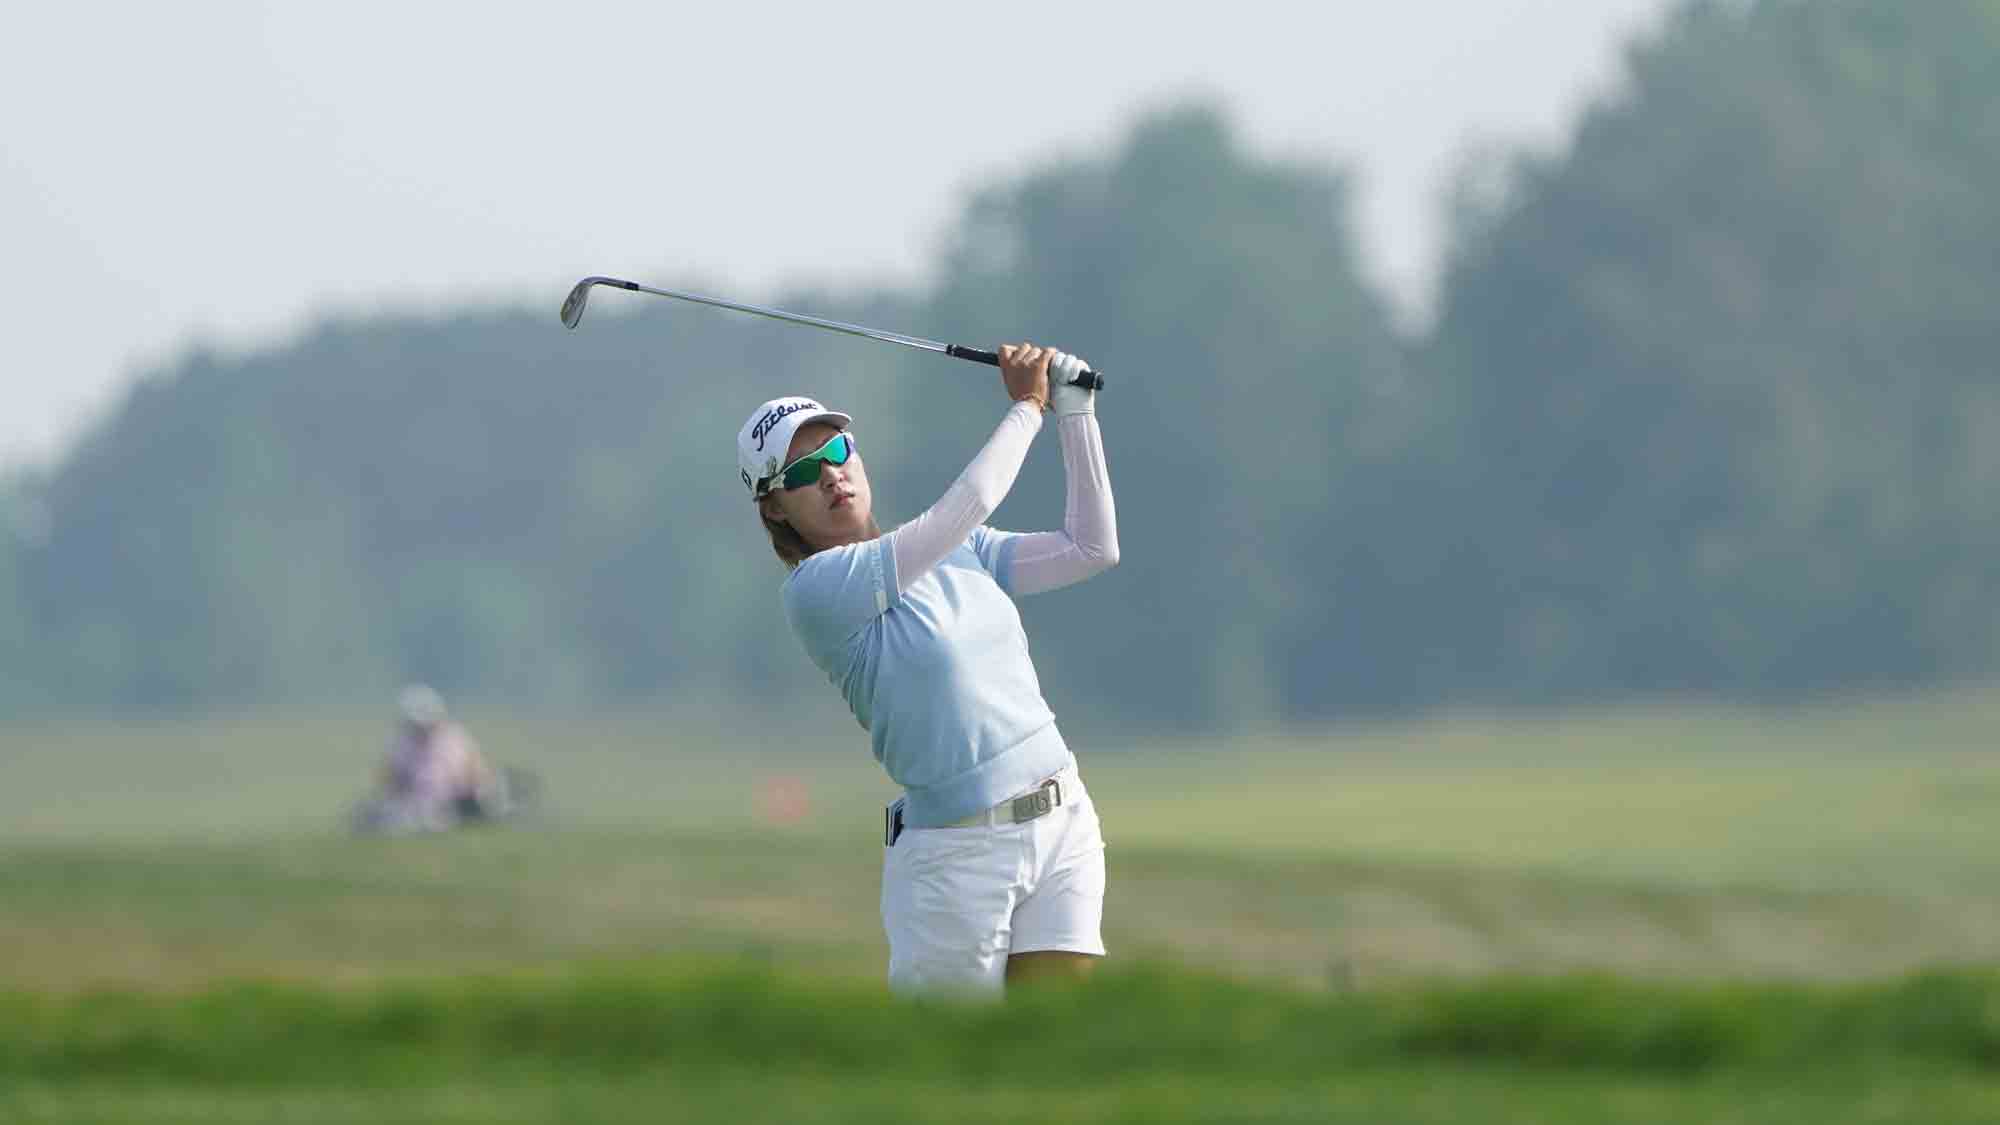 Minji Kang during the second round of the Island Resort Championship